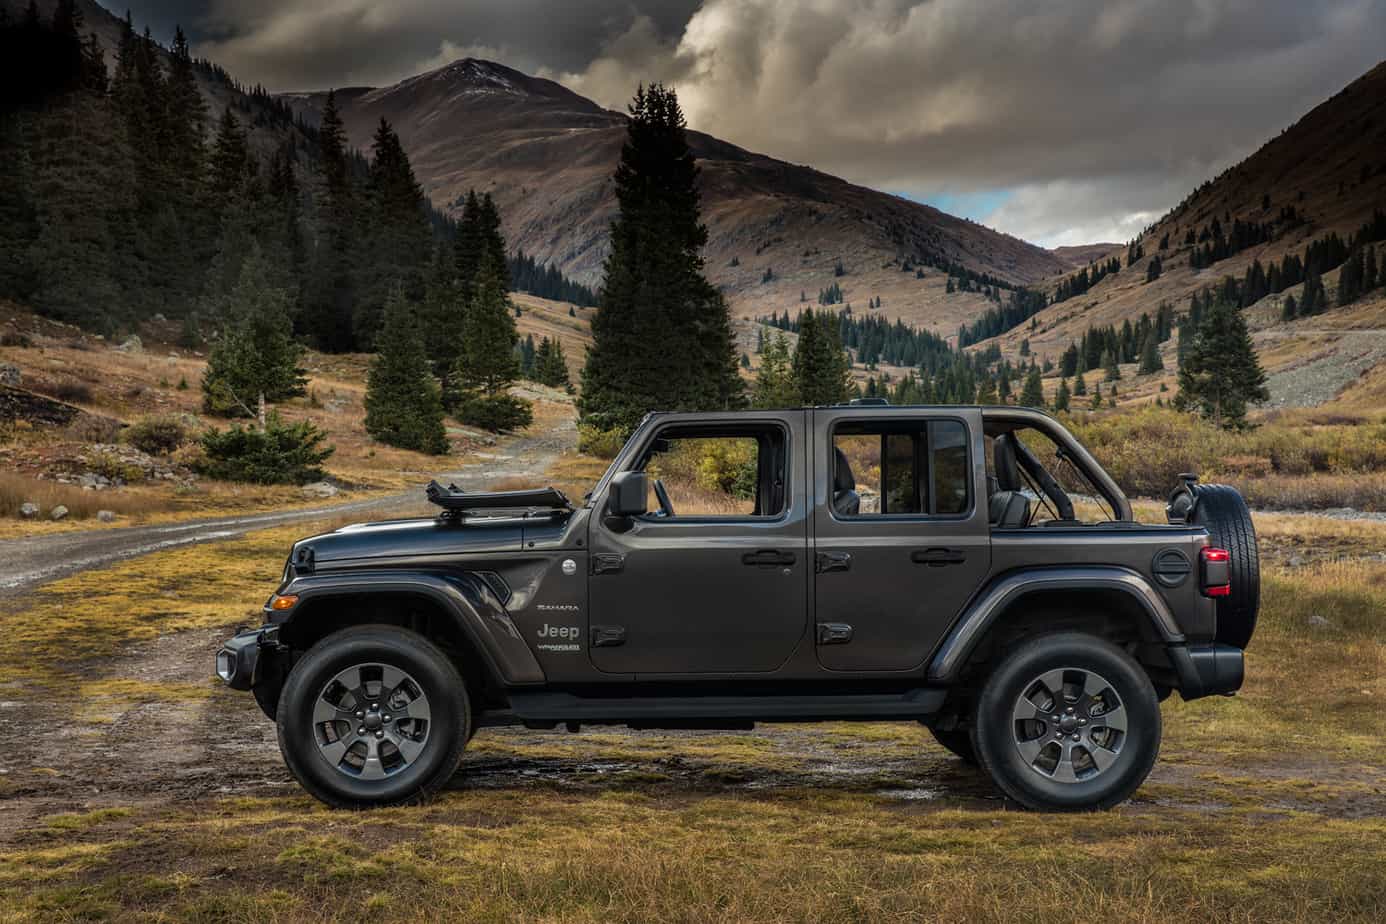 The Jeep Wrangler JL Has Arrived! - Expedition Portal